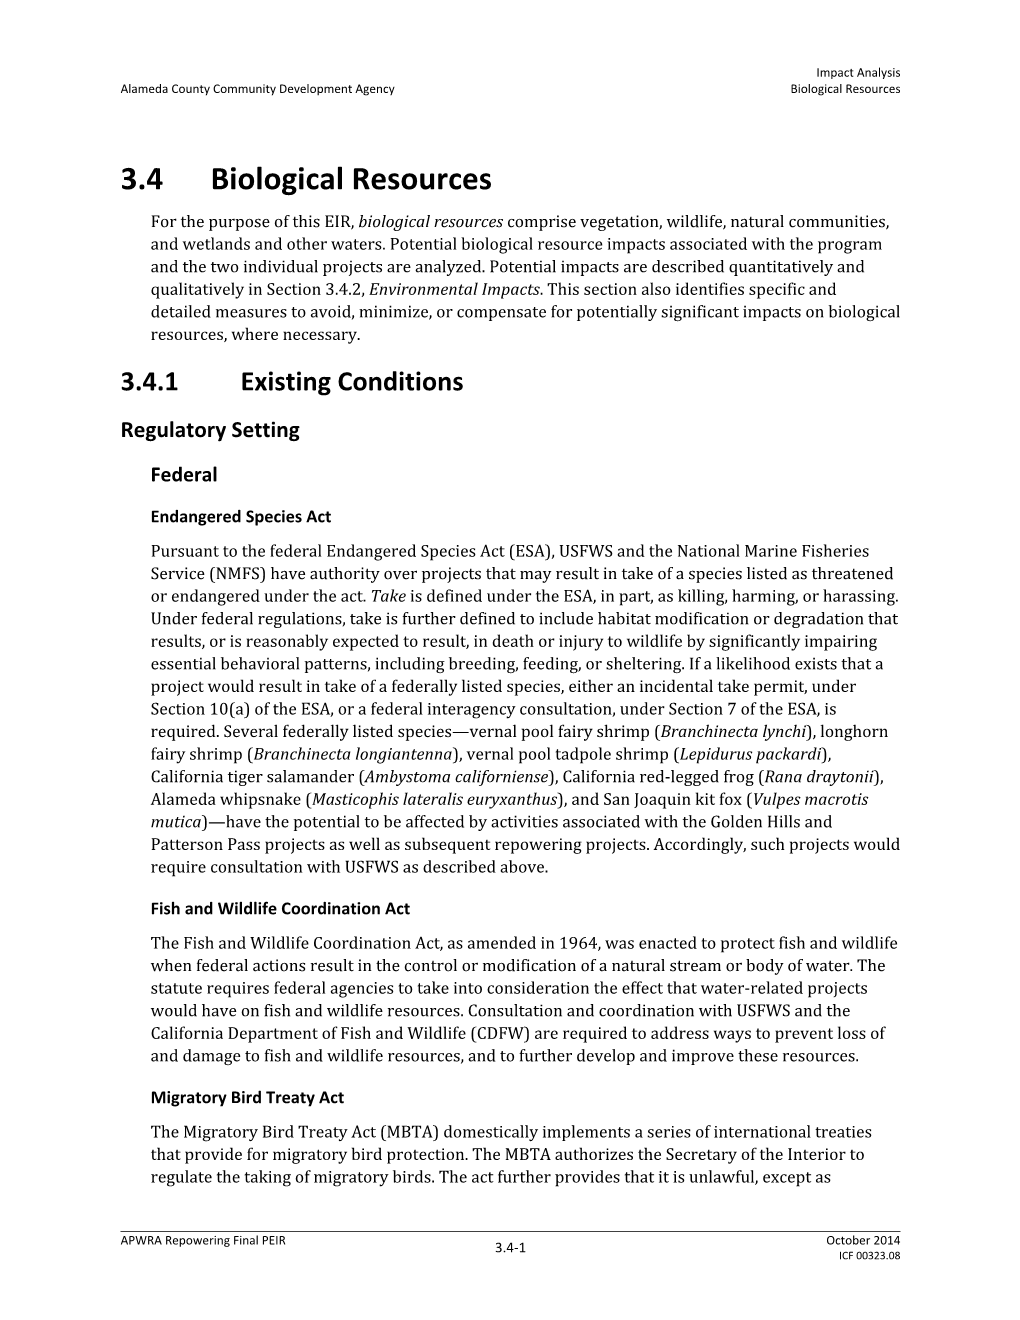 3.4 Biological Resources for the Purpose of This EIR, Biological Resources Comprise Vegetation, Wildlife, Natural Communities, and Wetlands and Other Waters